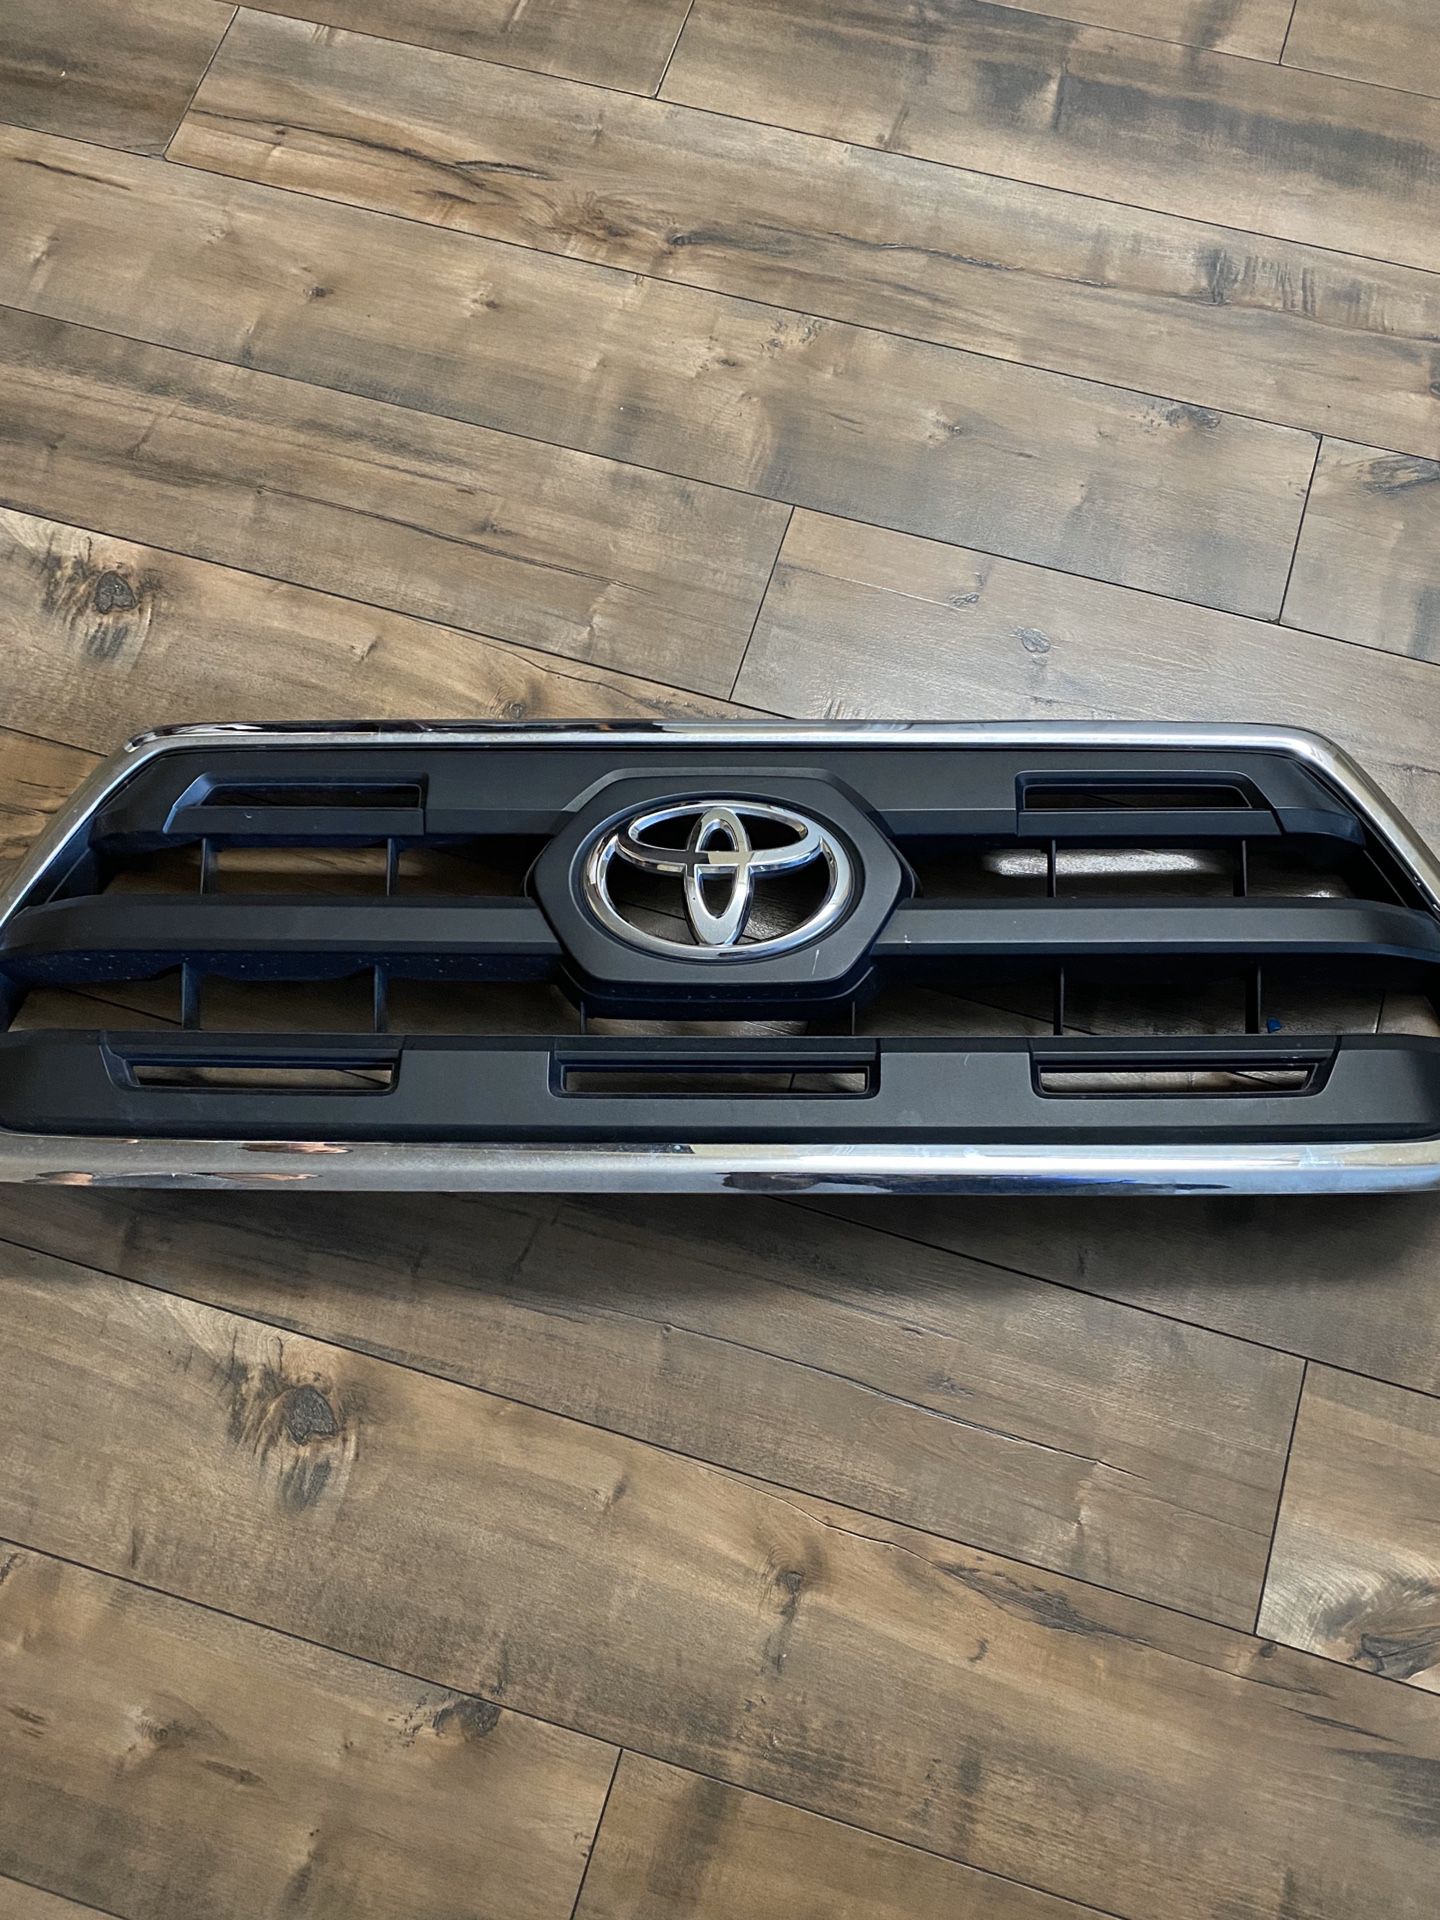 Toyota tacoma 2017 front grill